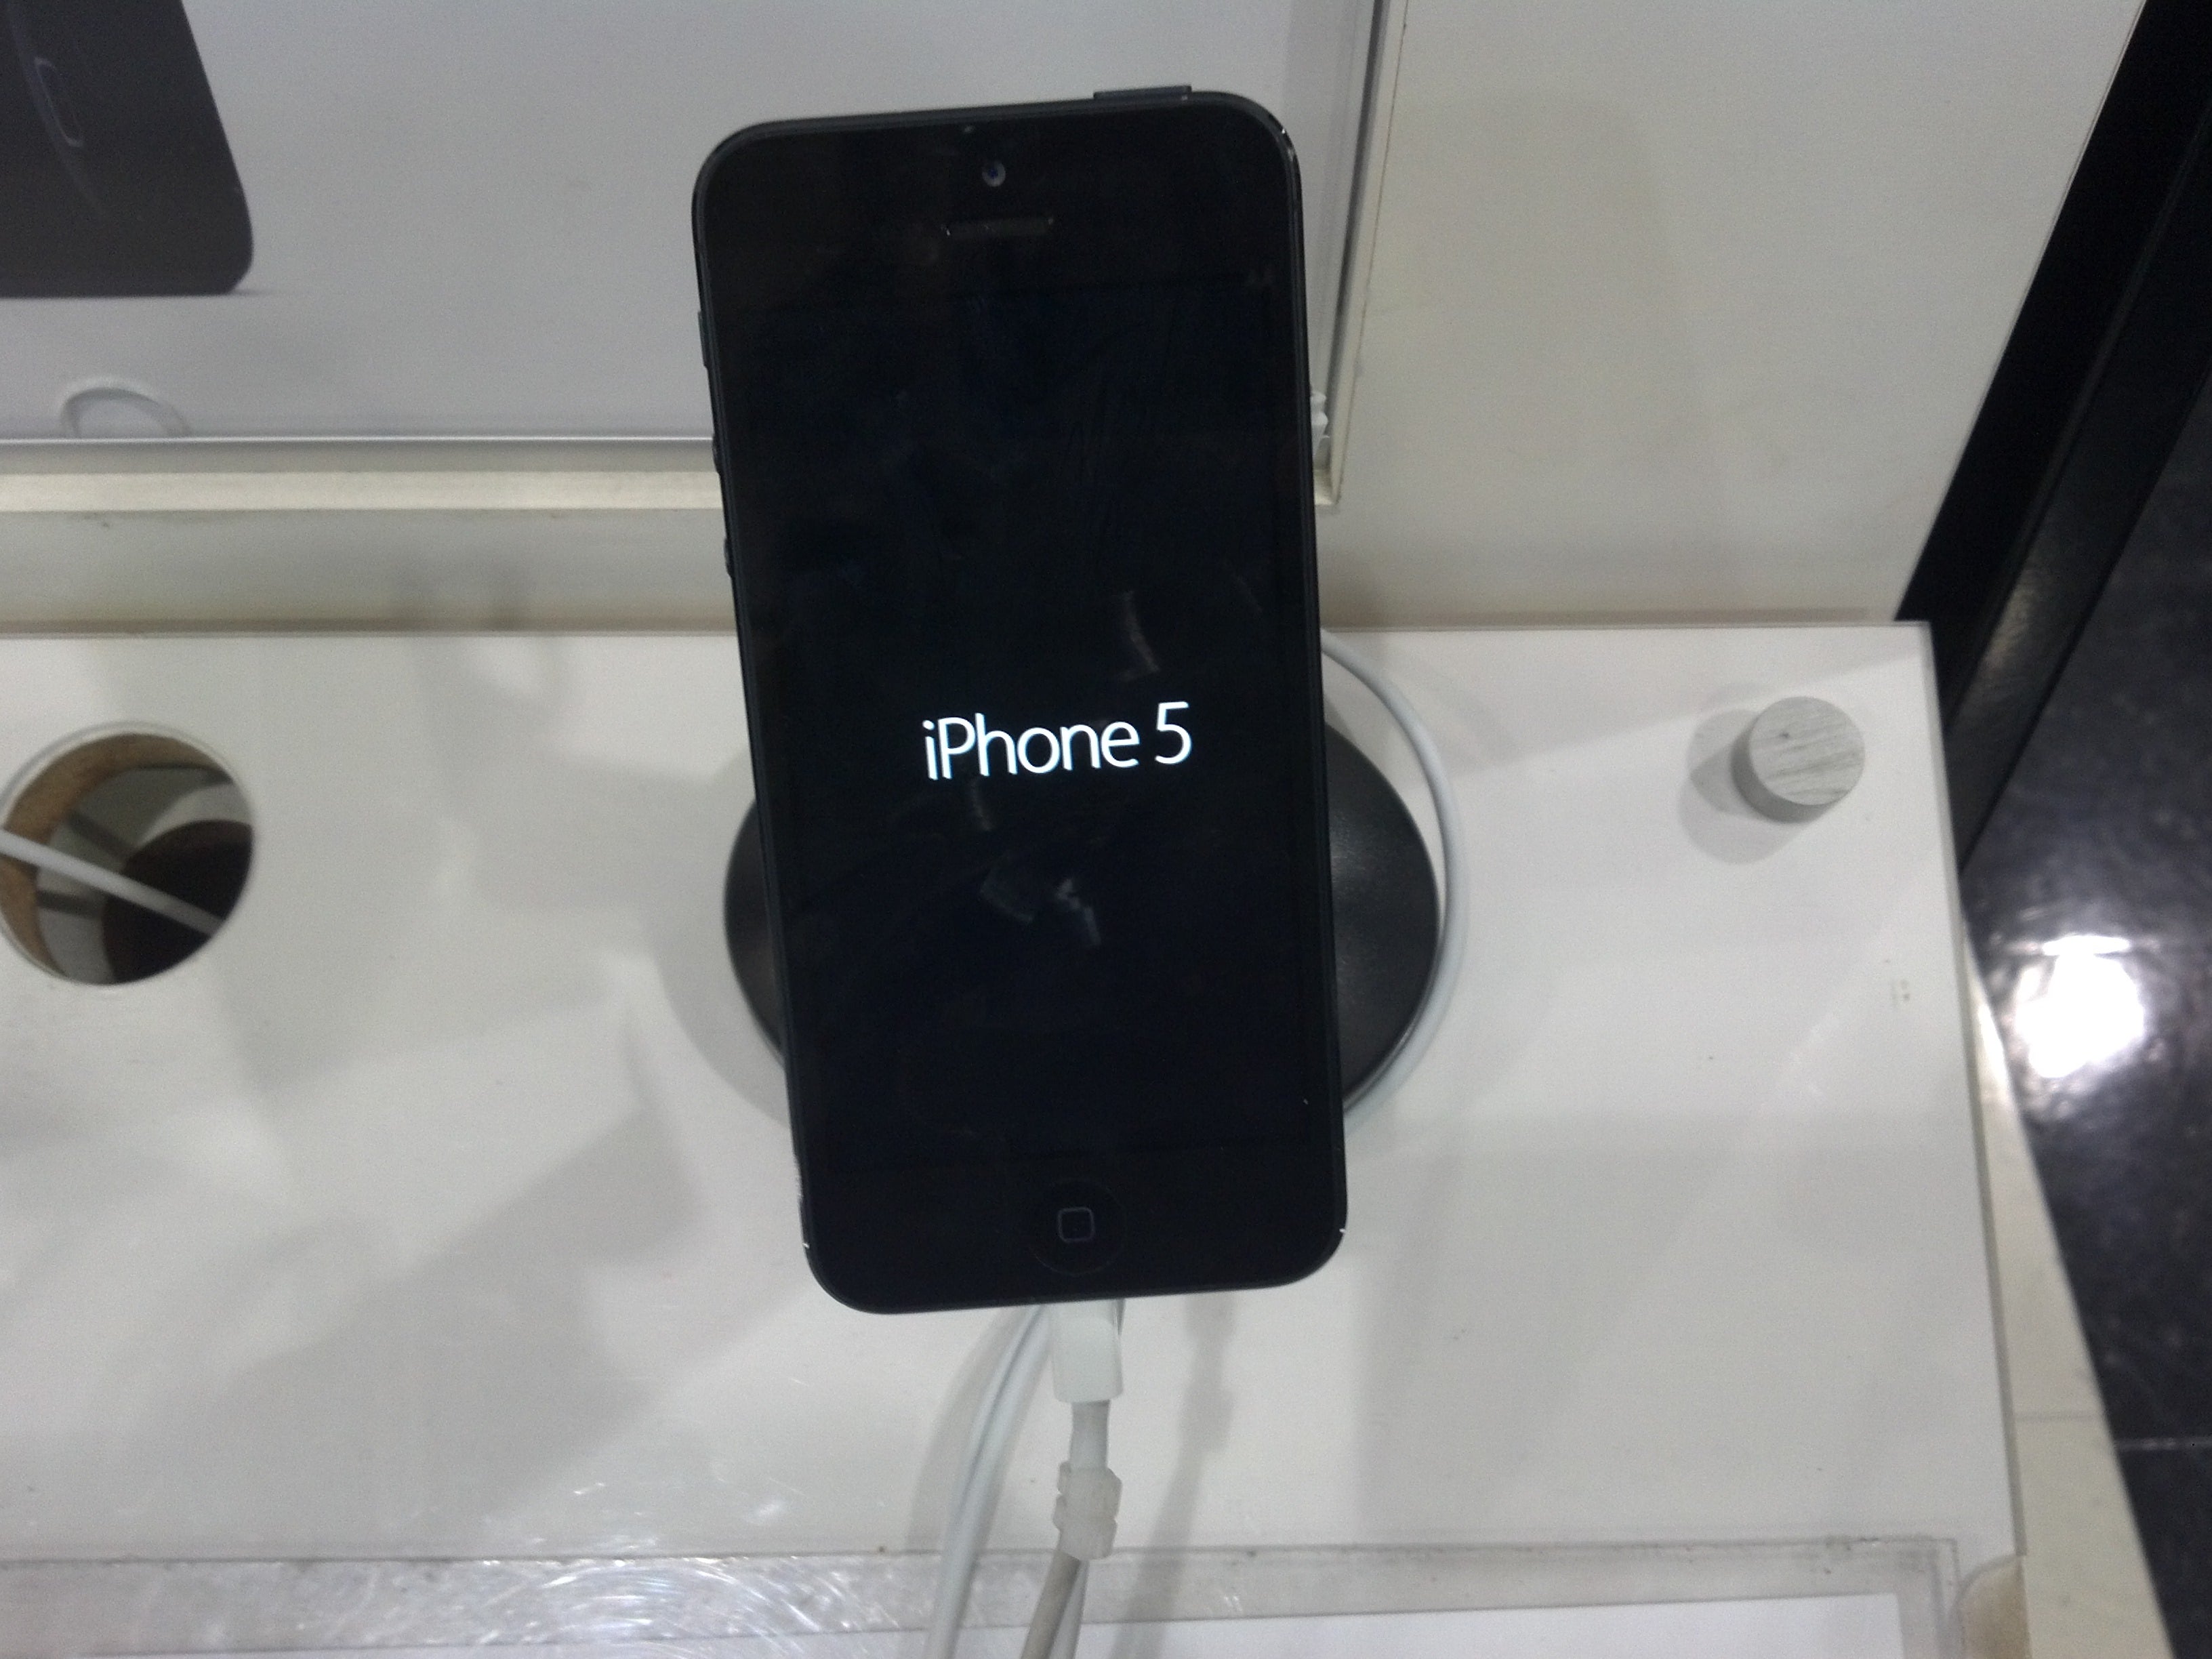 The Apple iPhone 5 - Pre-paid Apple iPhone 5 hard to keep in stock says Leap Executive